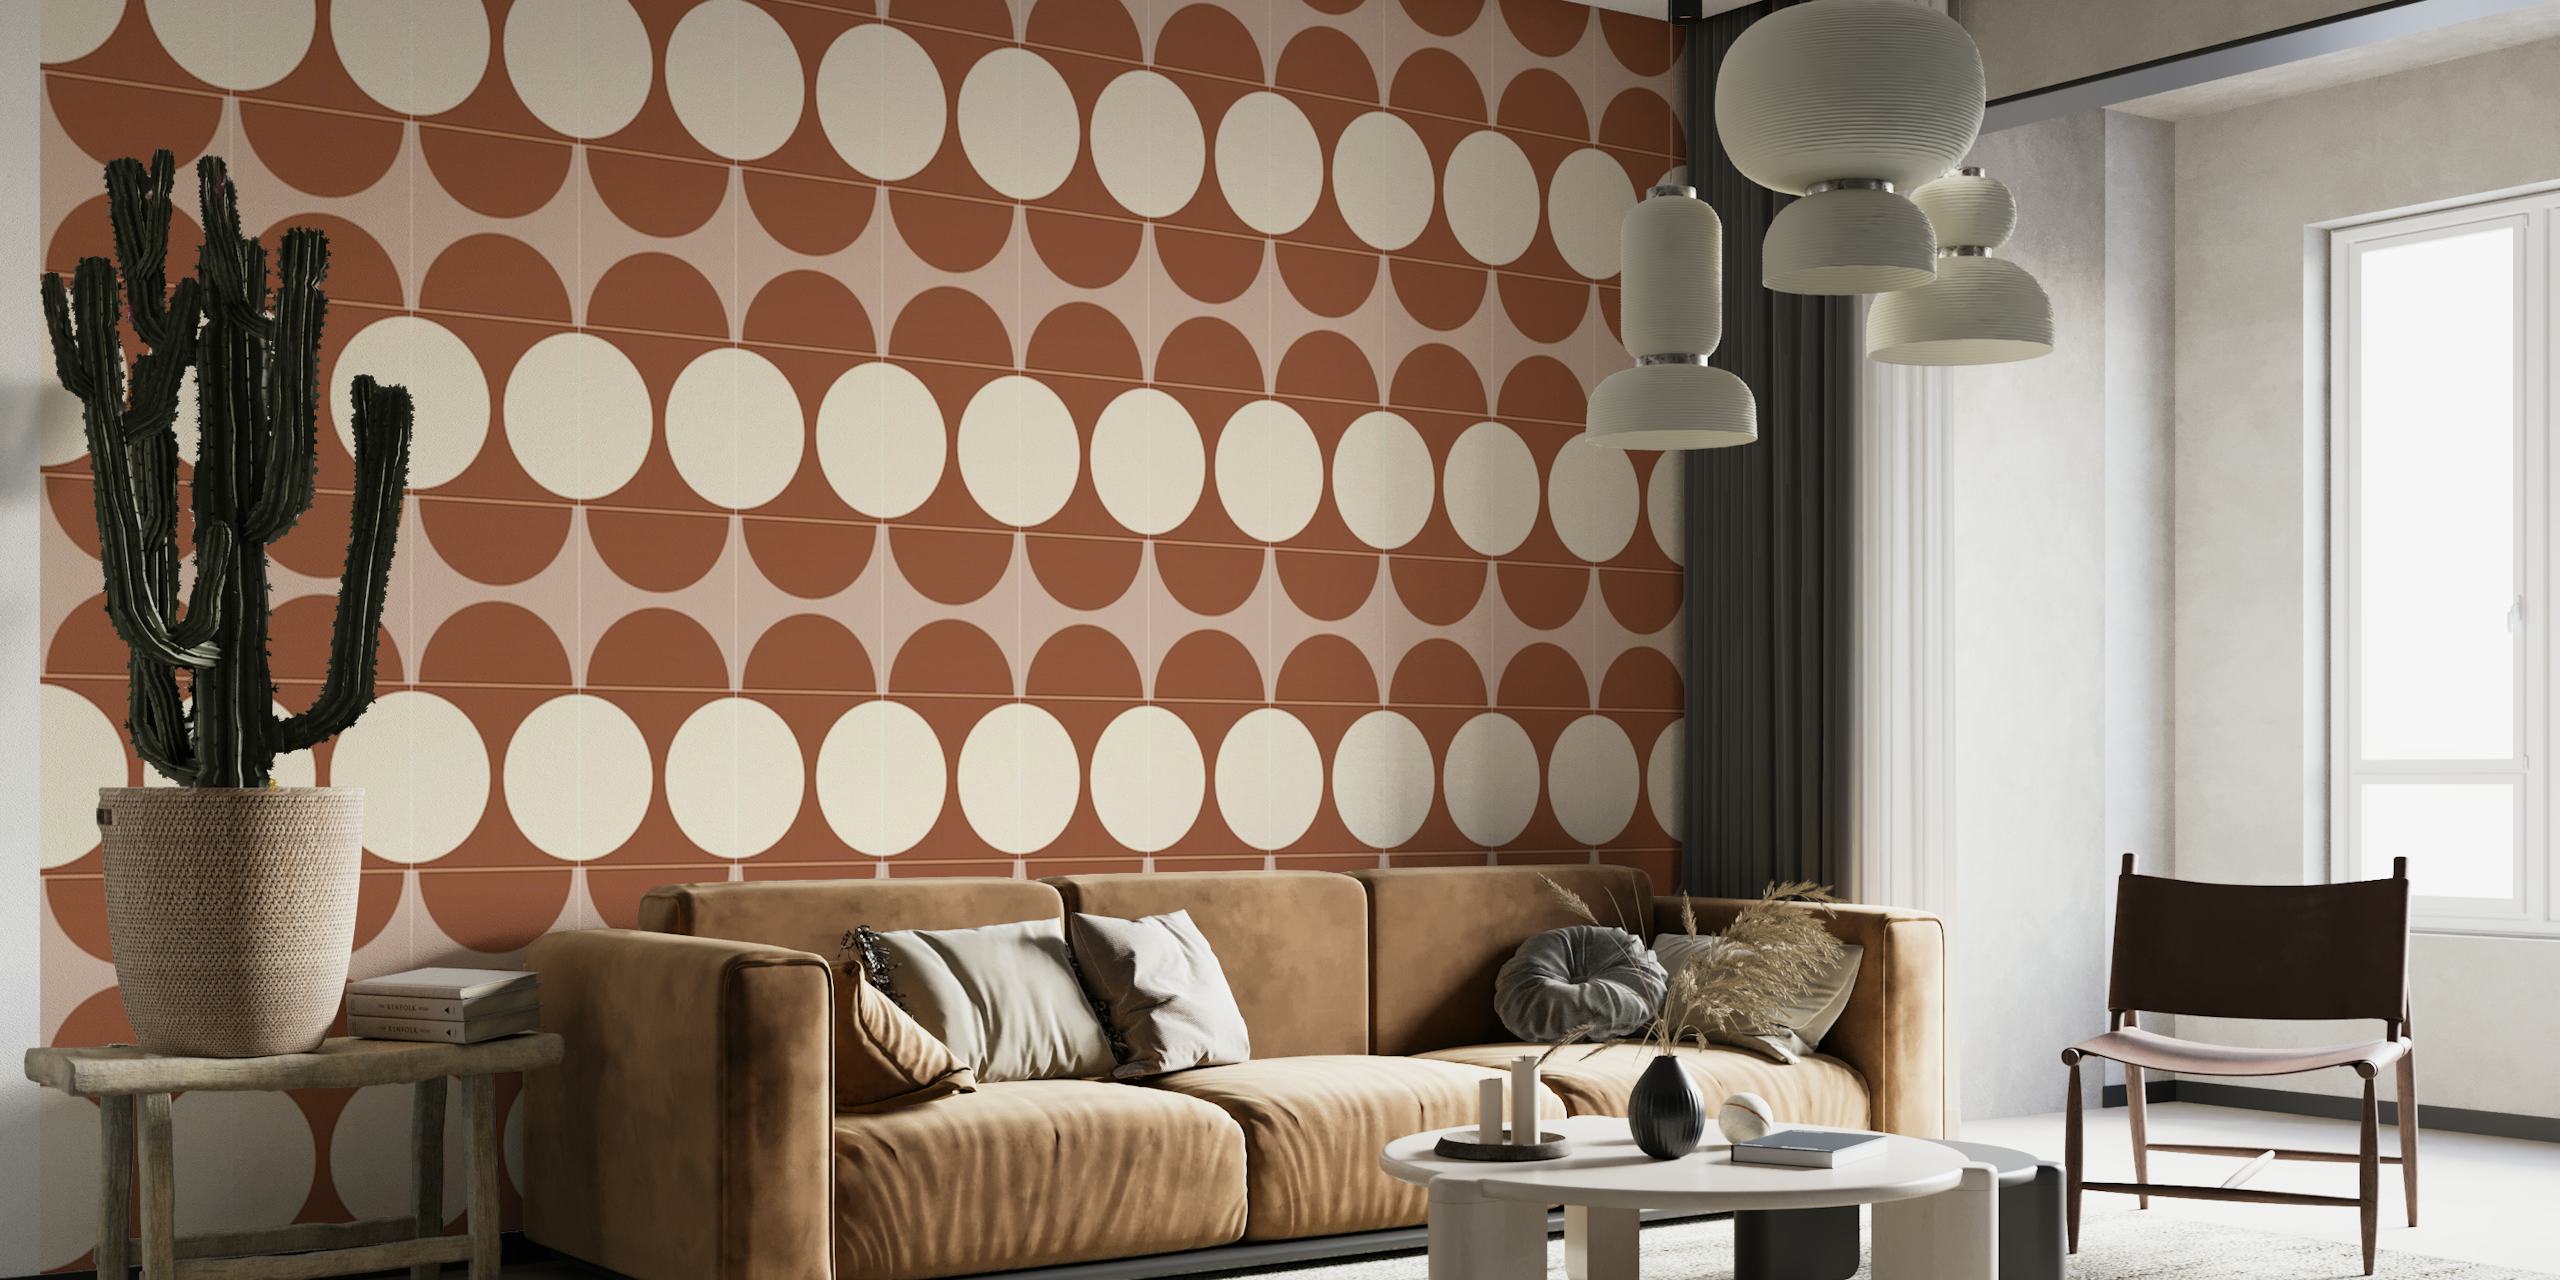 Cotto Tiles Cinnamon and Cream Optical tapety